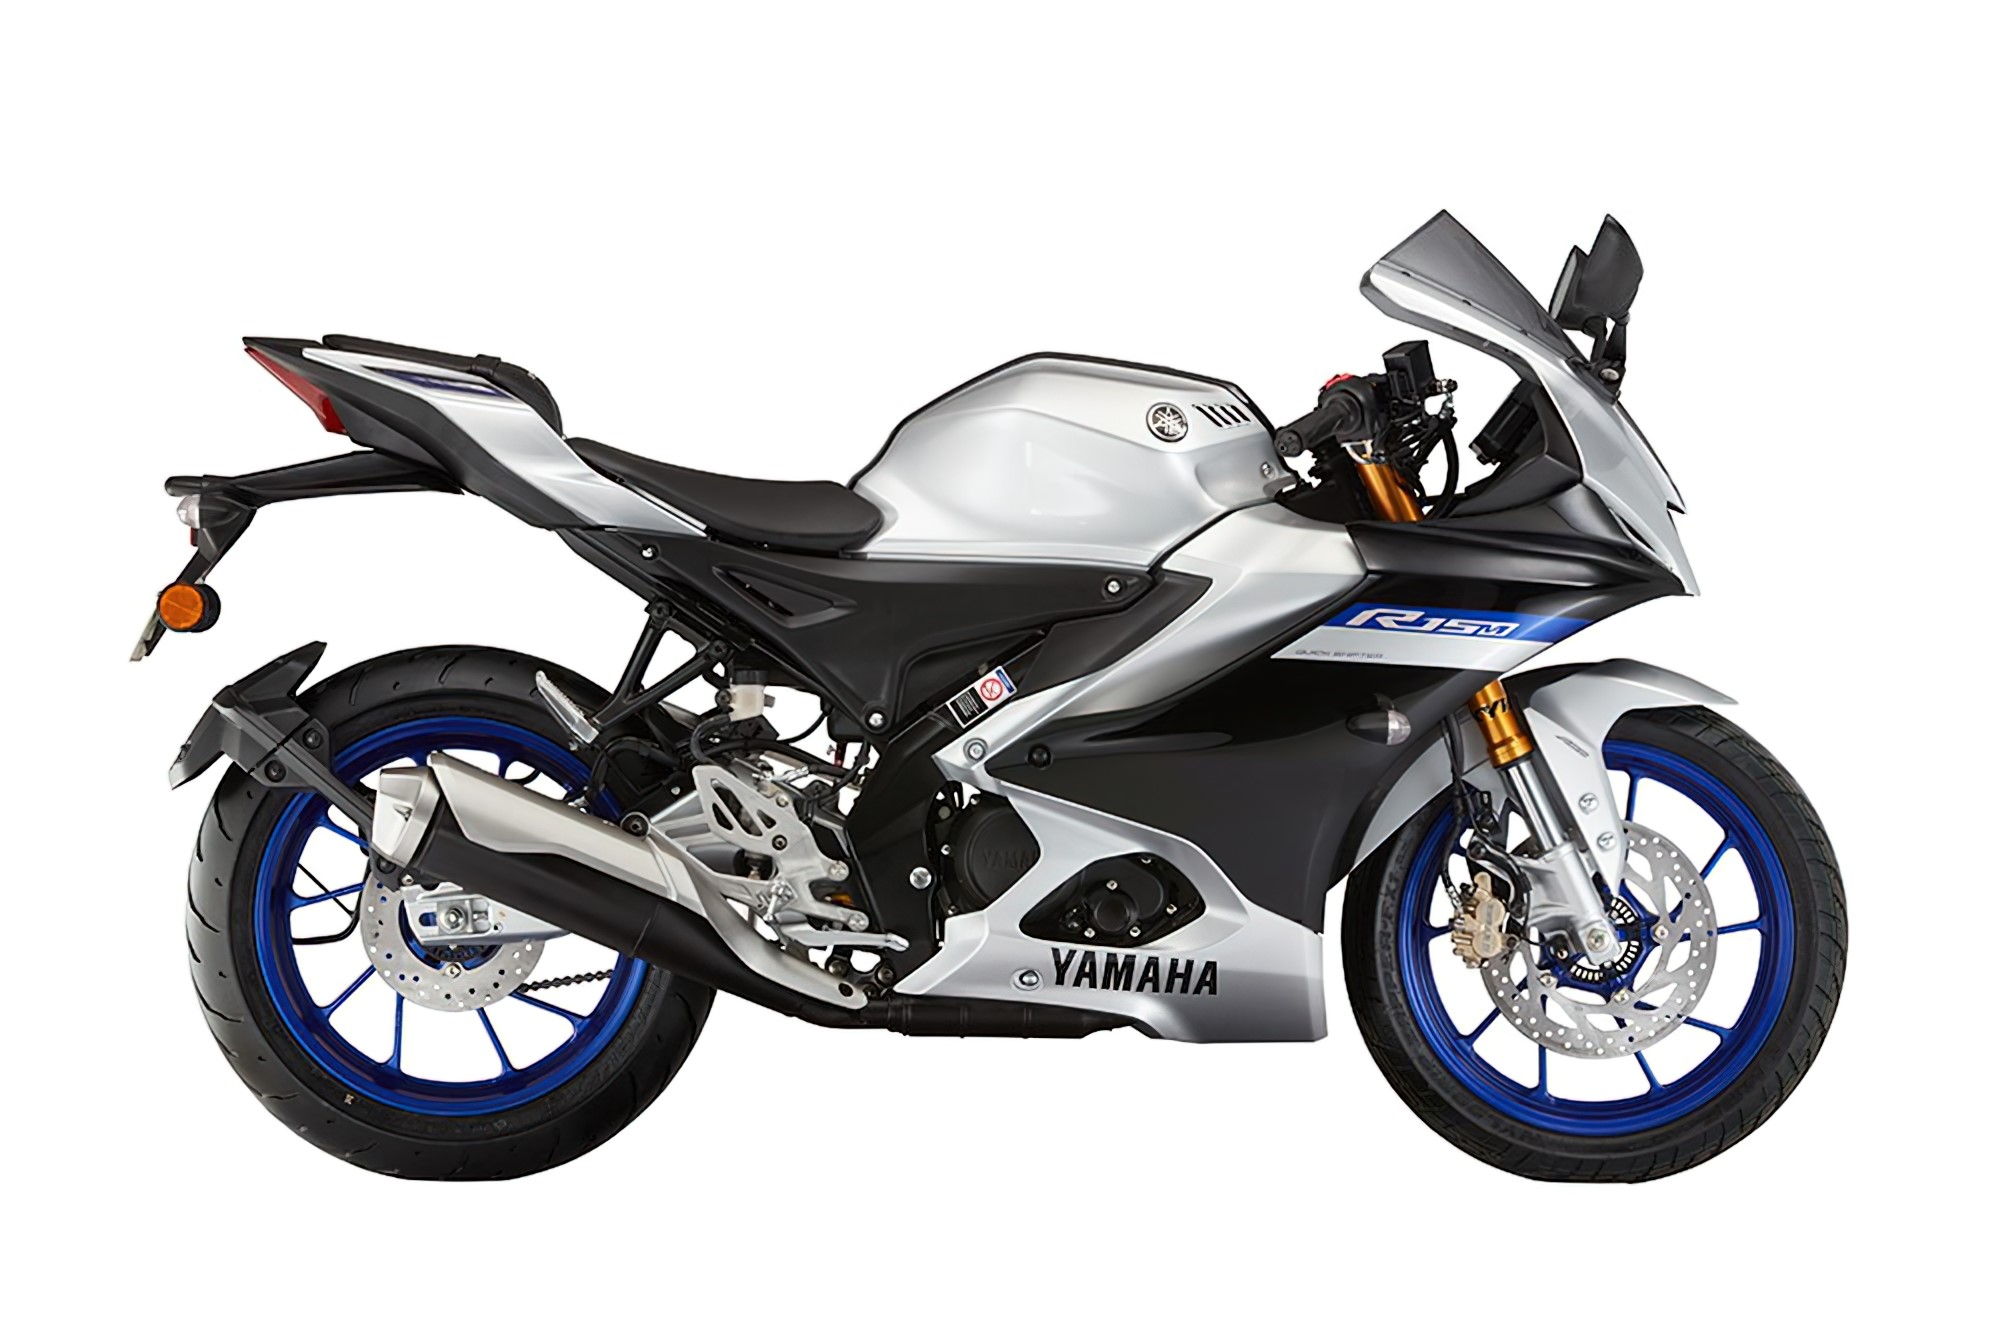 2022 Yamaha R15M | Complete Specs and Images - MotoNews World